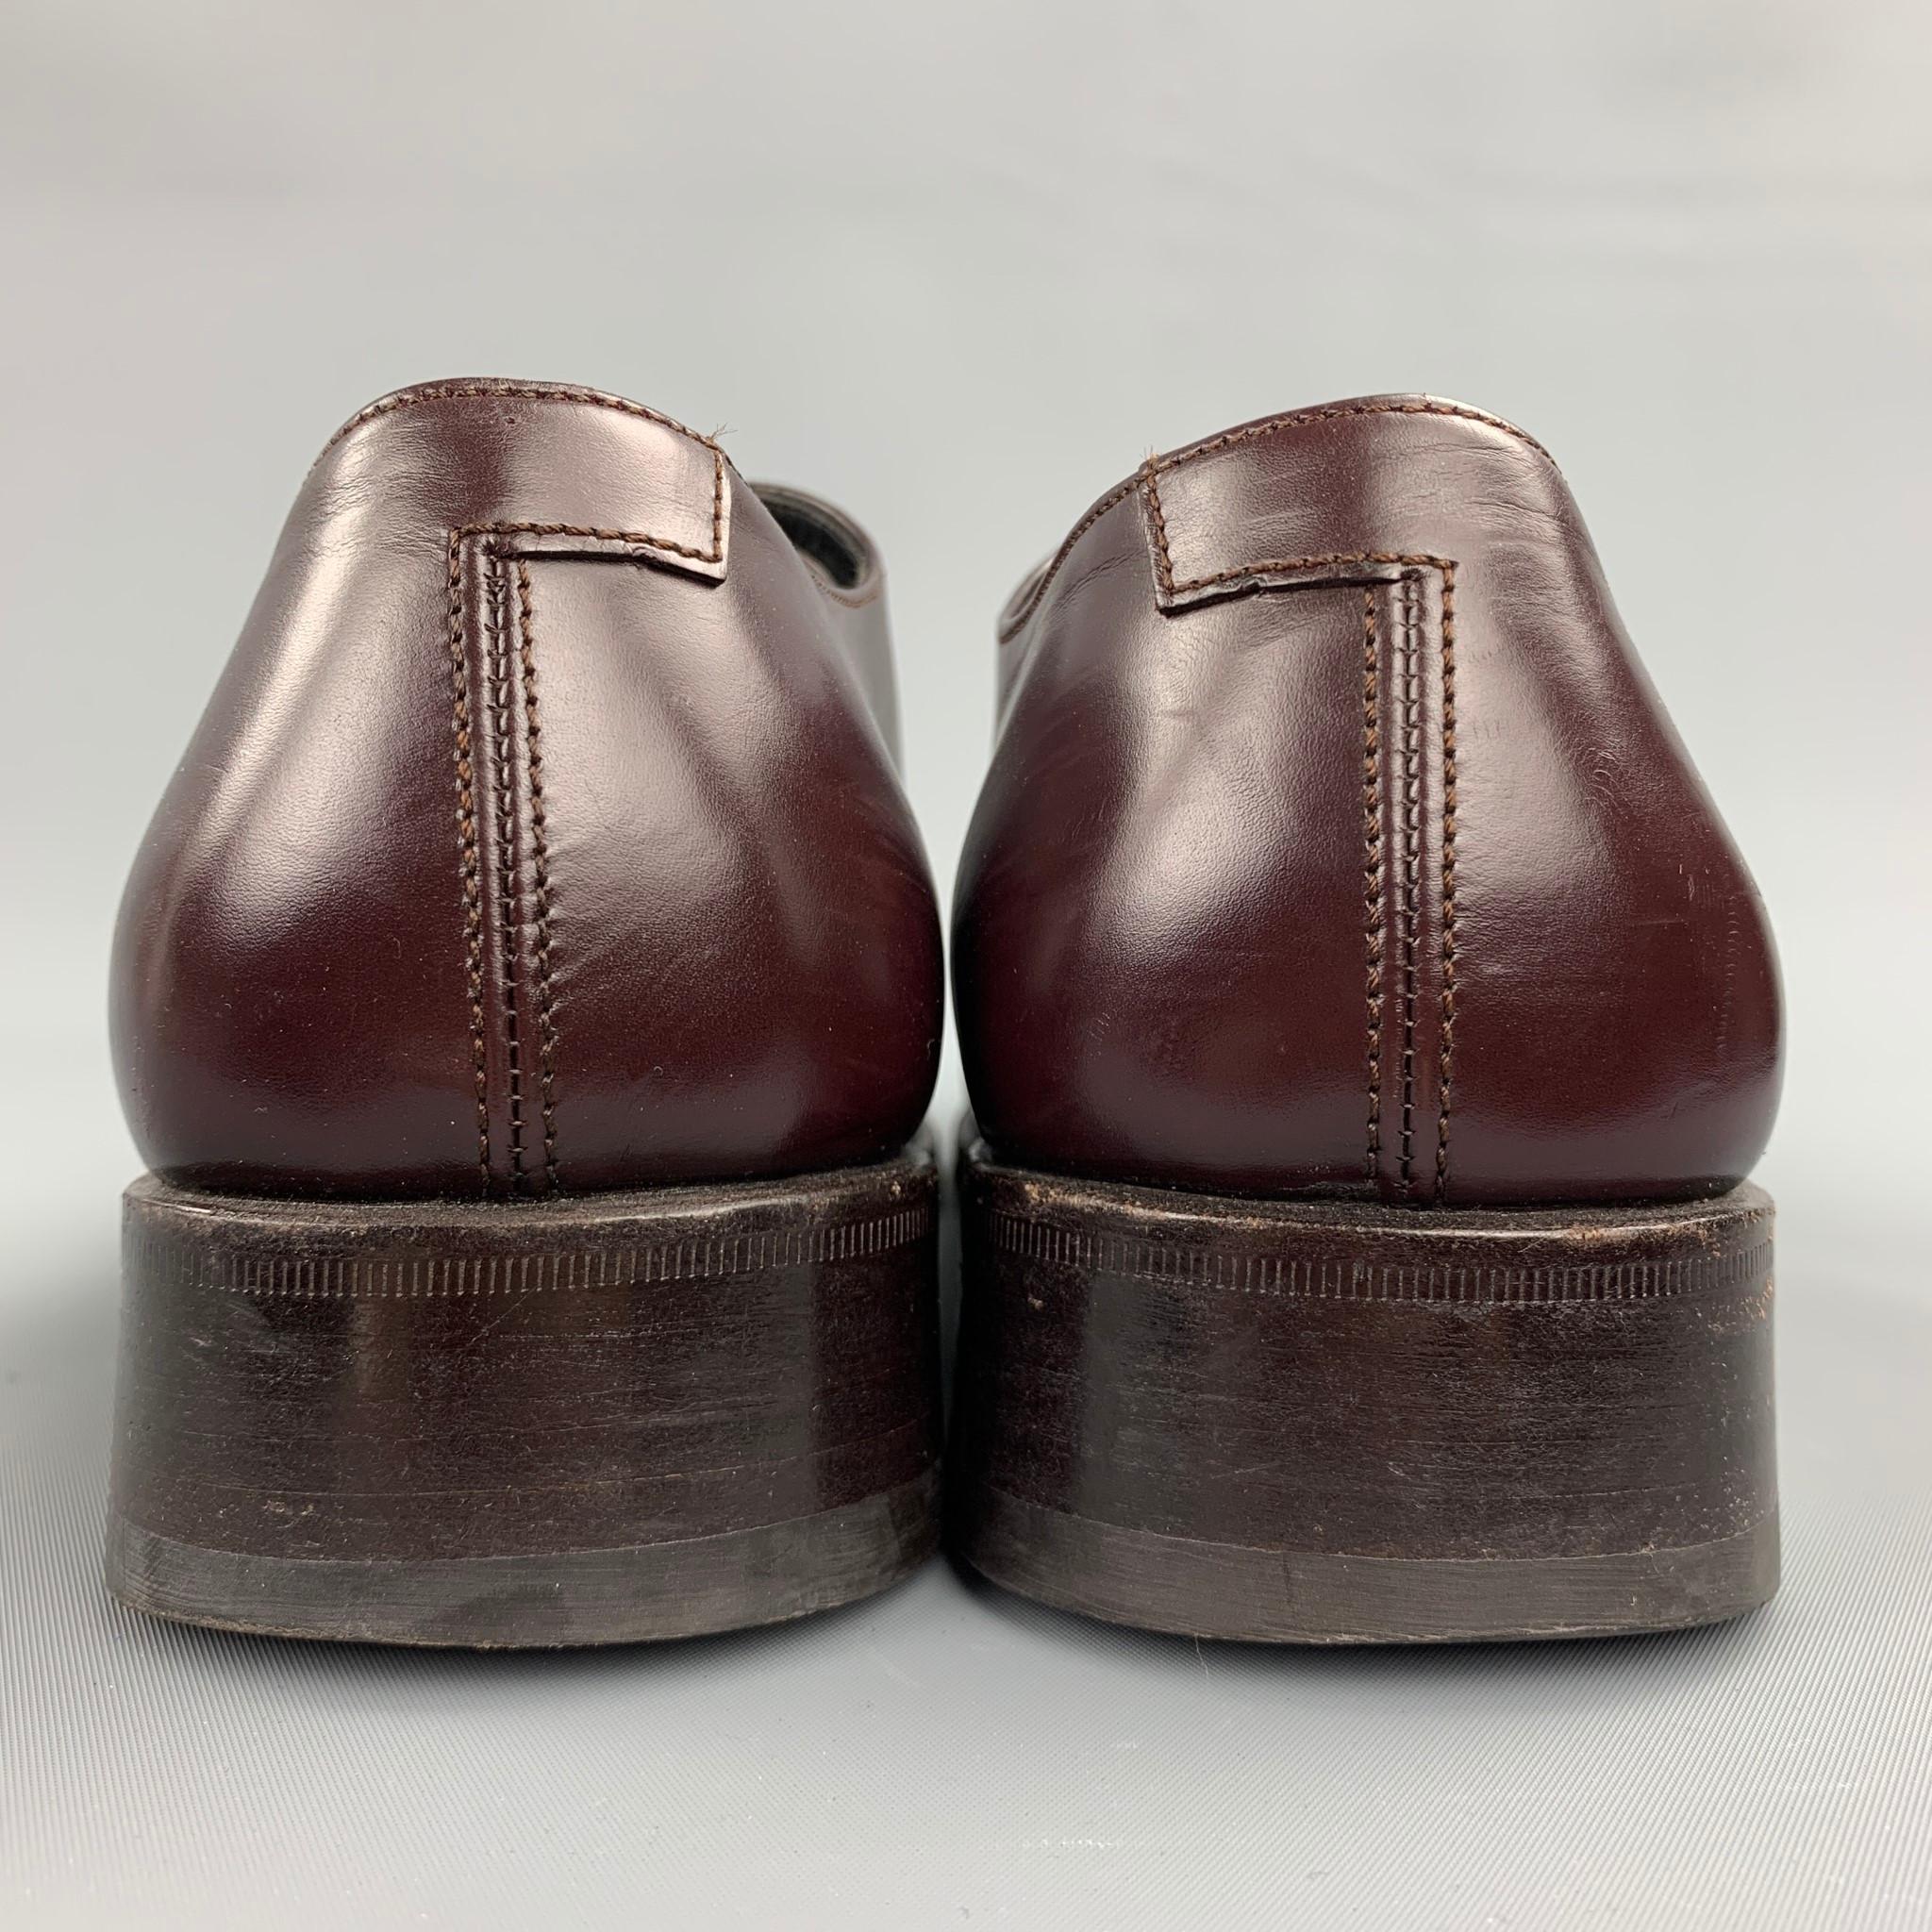 Black GUCCI Size 9 Burgundy Leather Monk Strap Loafers